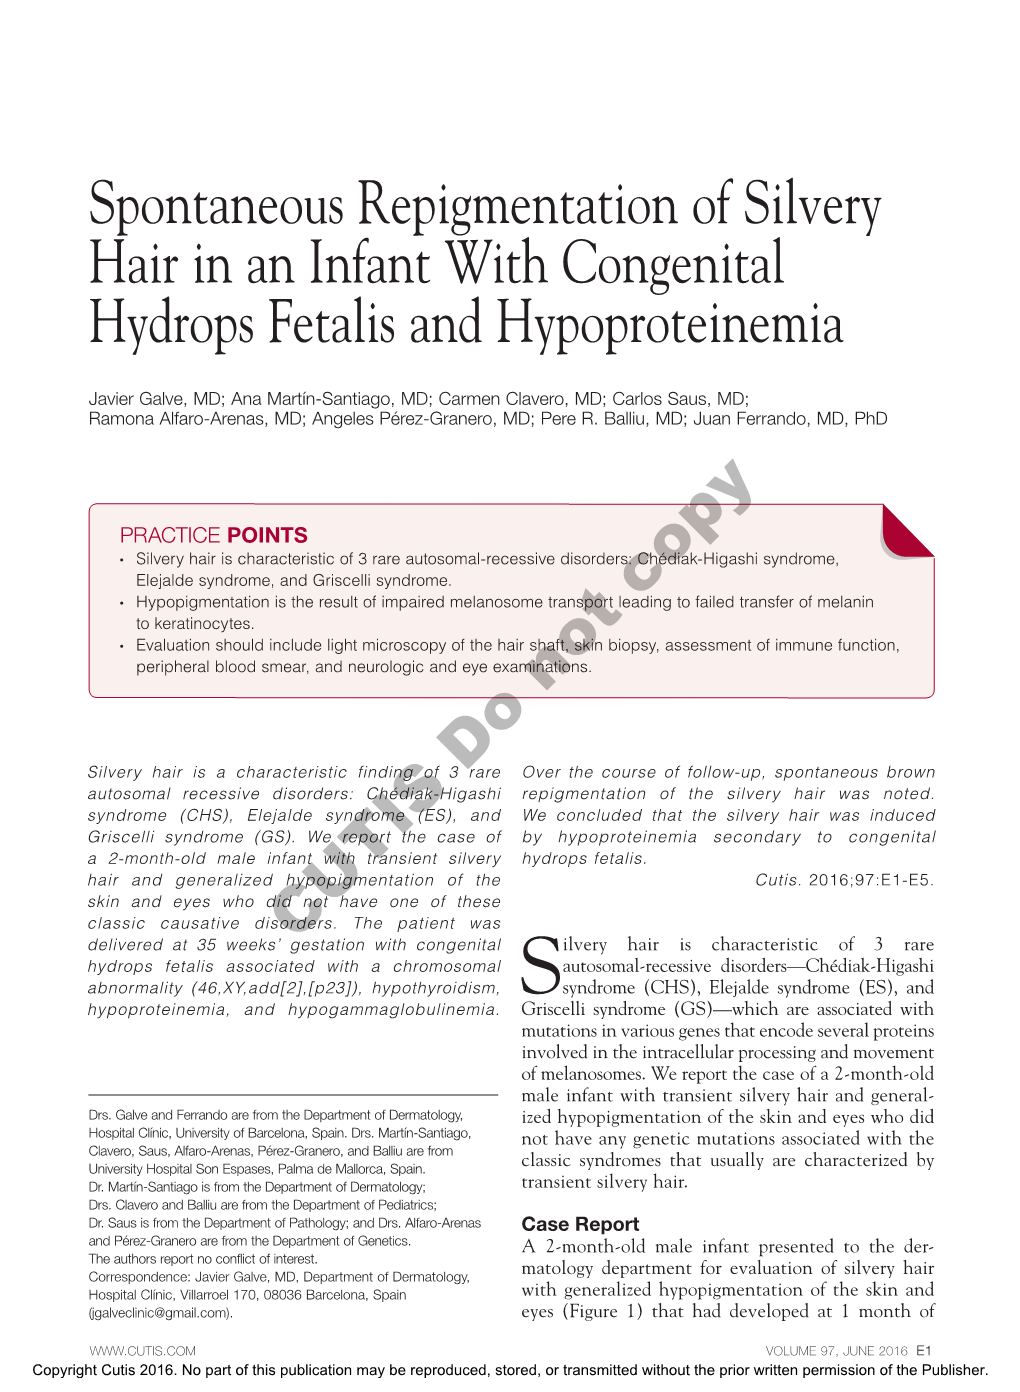 Spontaneous Repigmentation of Silvery Hair in an Infant with Congenital Hydrops Fetalis and Hypoproteinemia